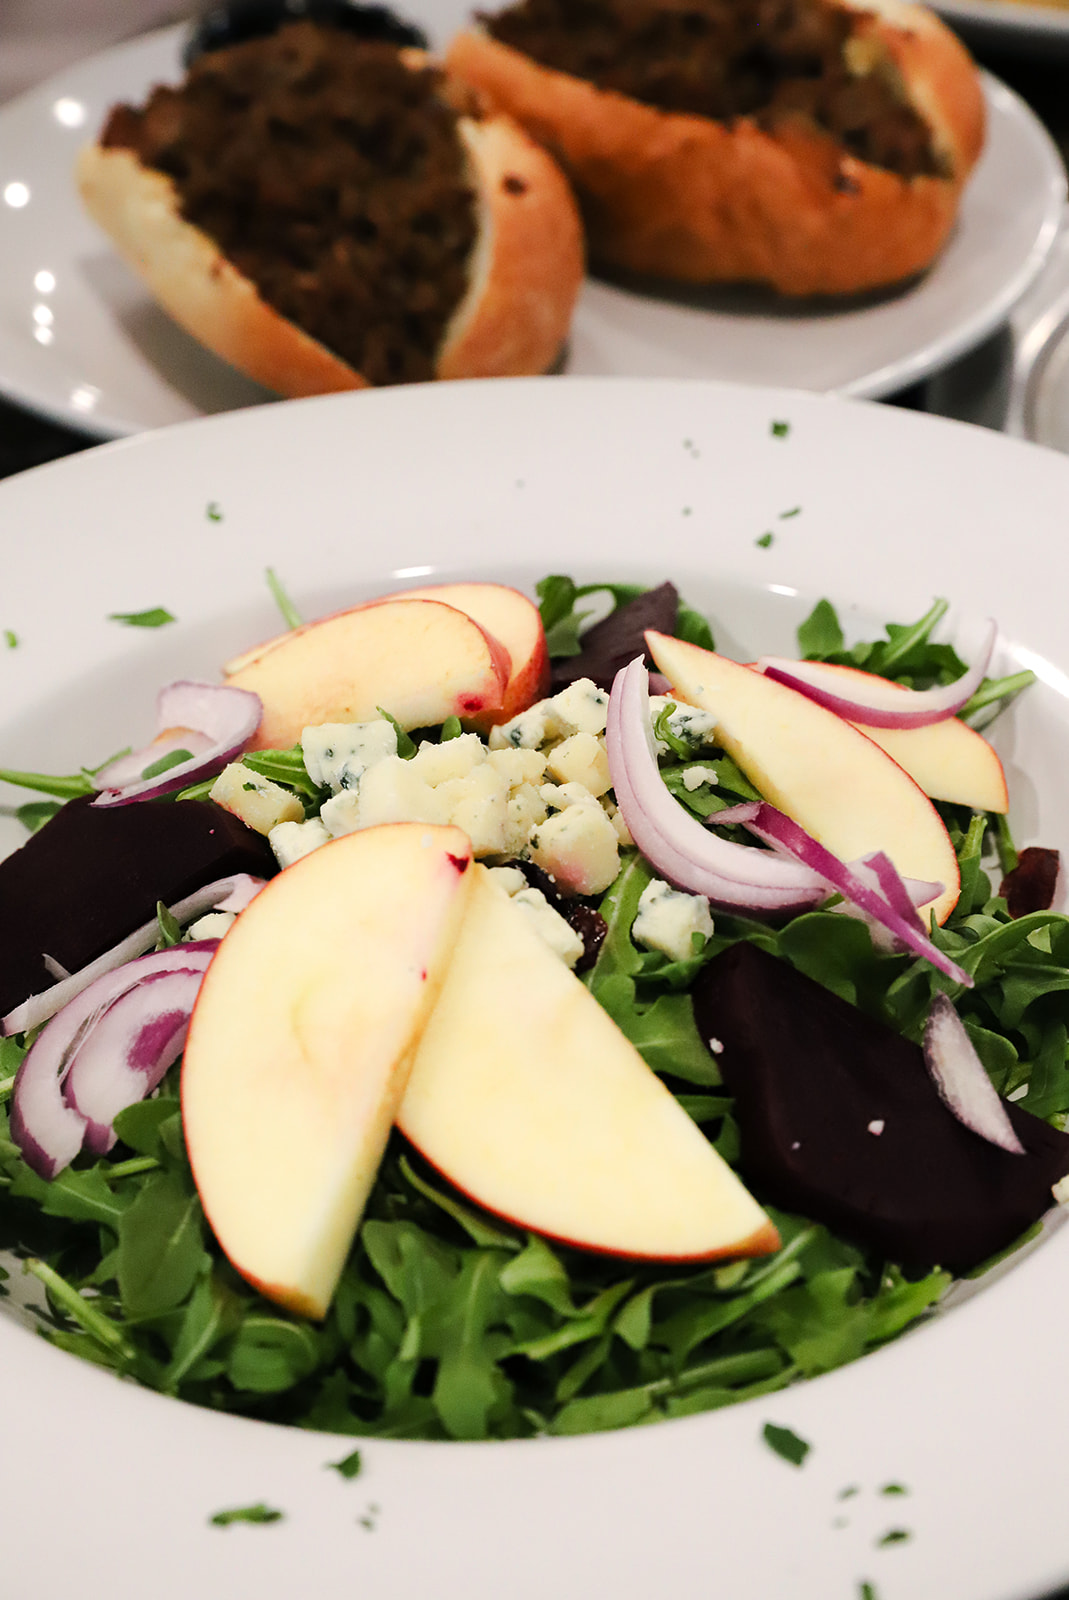 Salad with apples and cheese and cheesesteak